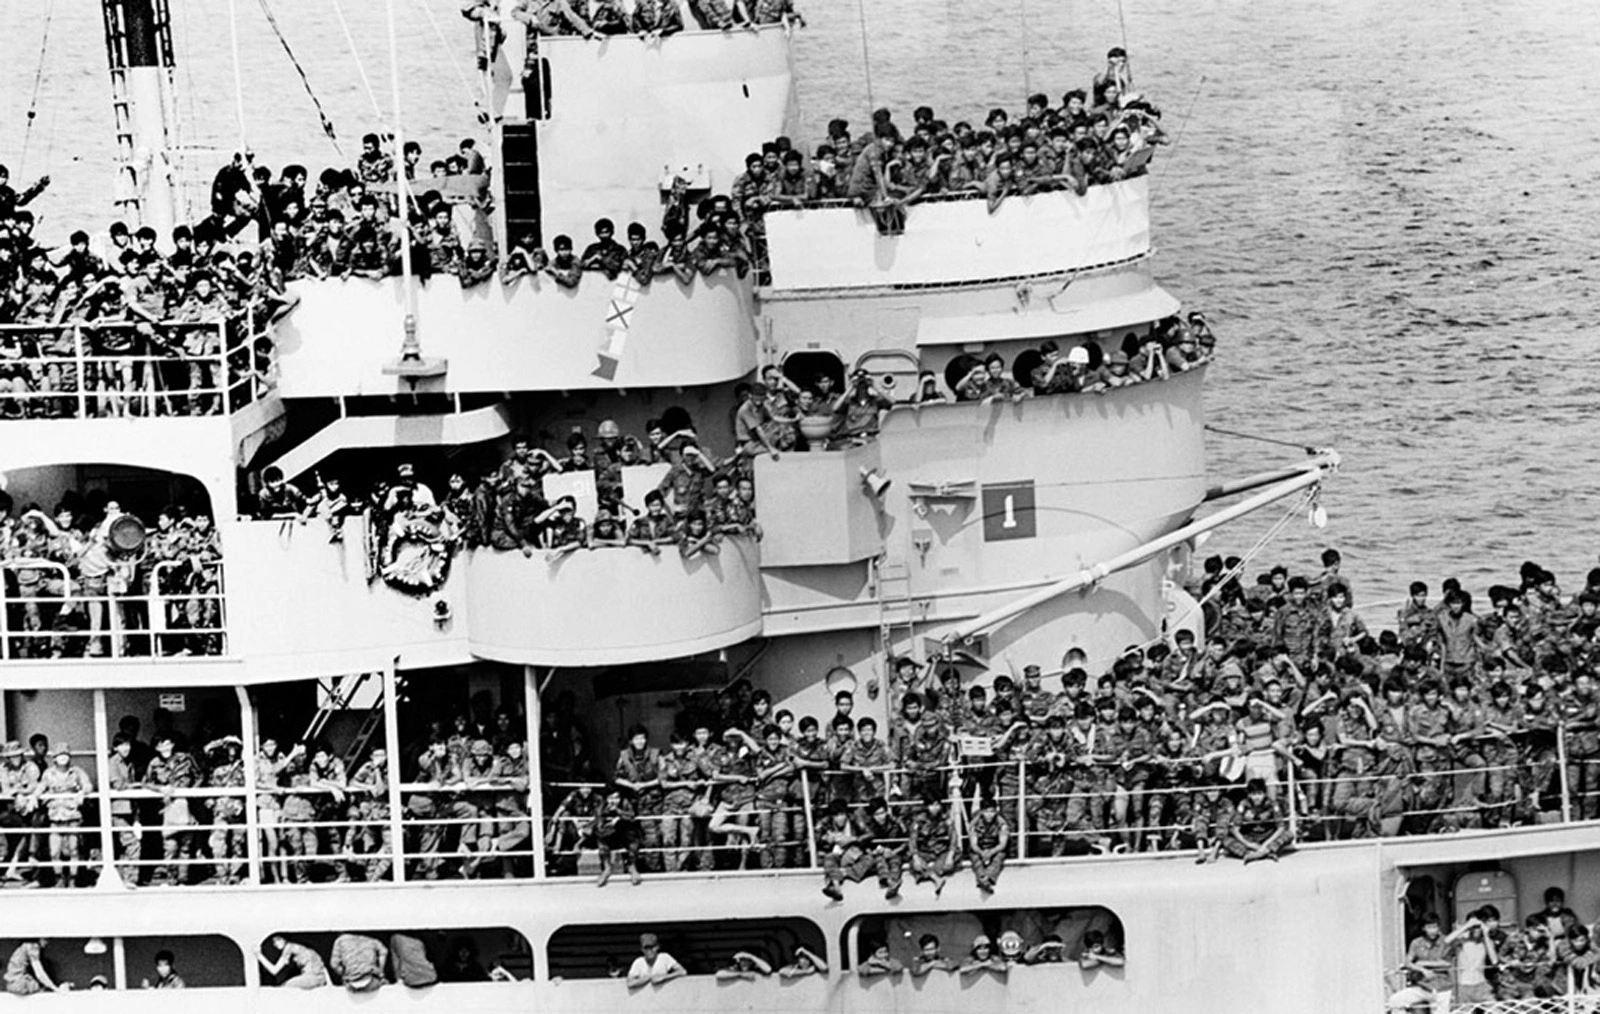 Troop Transport Ship, Military Personnel, Naval Vessel, Crowded Decks, Soldier Transport, Black and White Photo, Military Mobilization, Combat Helmets, Deployment, War Transit, Soldier Readiness, Military Journey, Sea Deployment, Armed Forces Movement, Historical Military Transport, Warzone Deployment, Military Scale, Soldier Anticipation, Service Member Experience